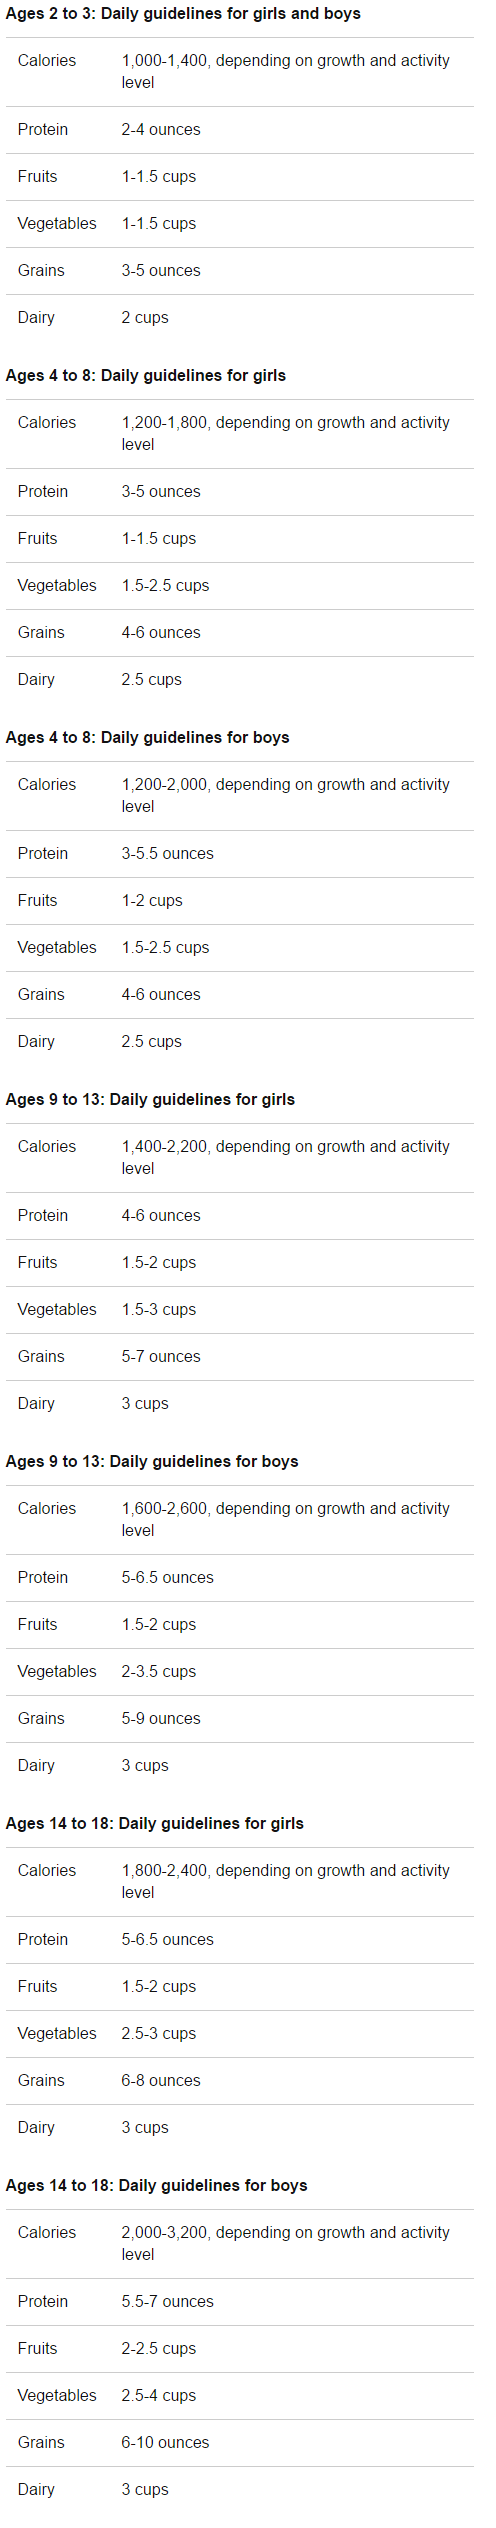 image-nutrition-guidelines-kids